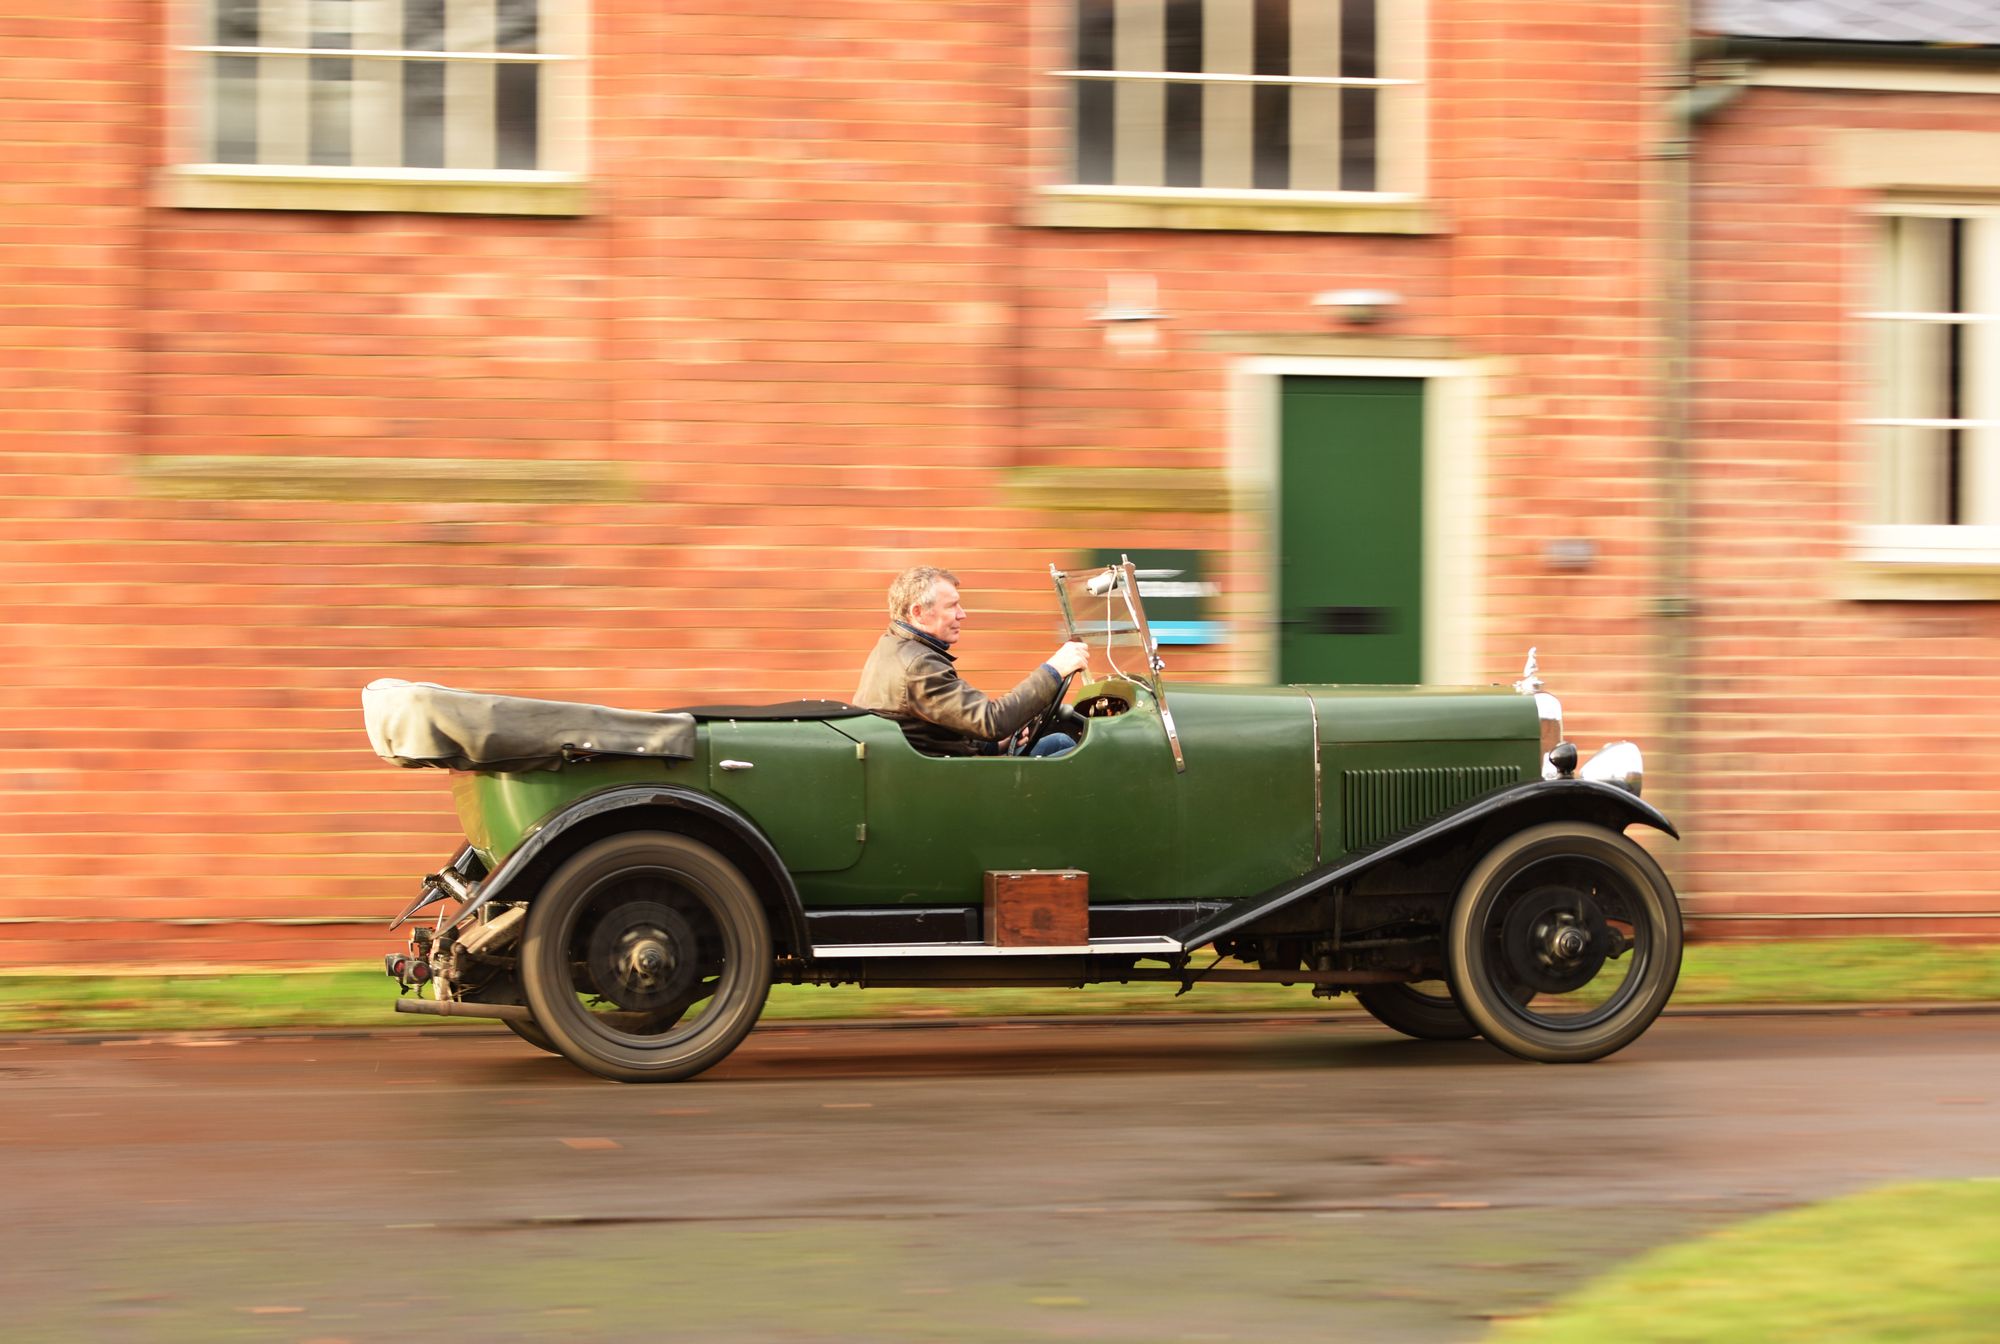 UK Man Daily Drives Classic 1931 Tourer To Work Everyday